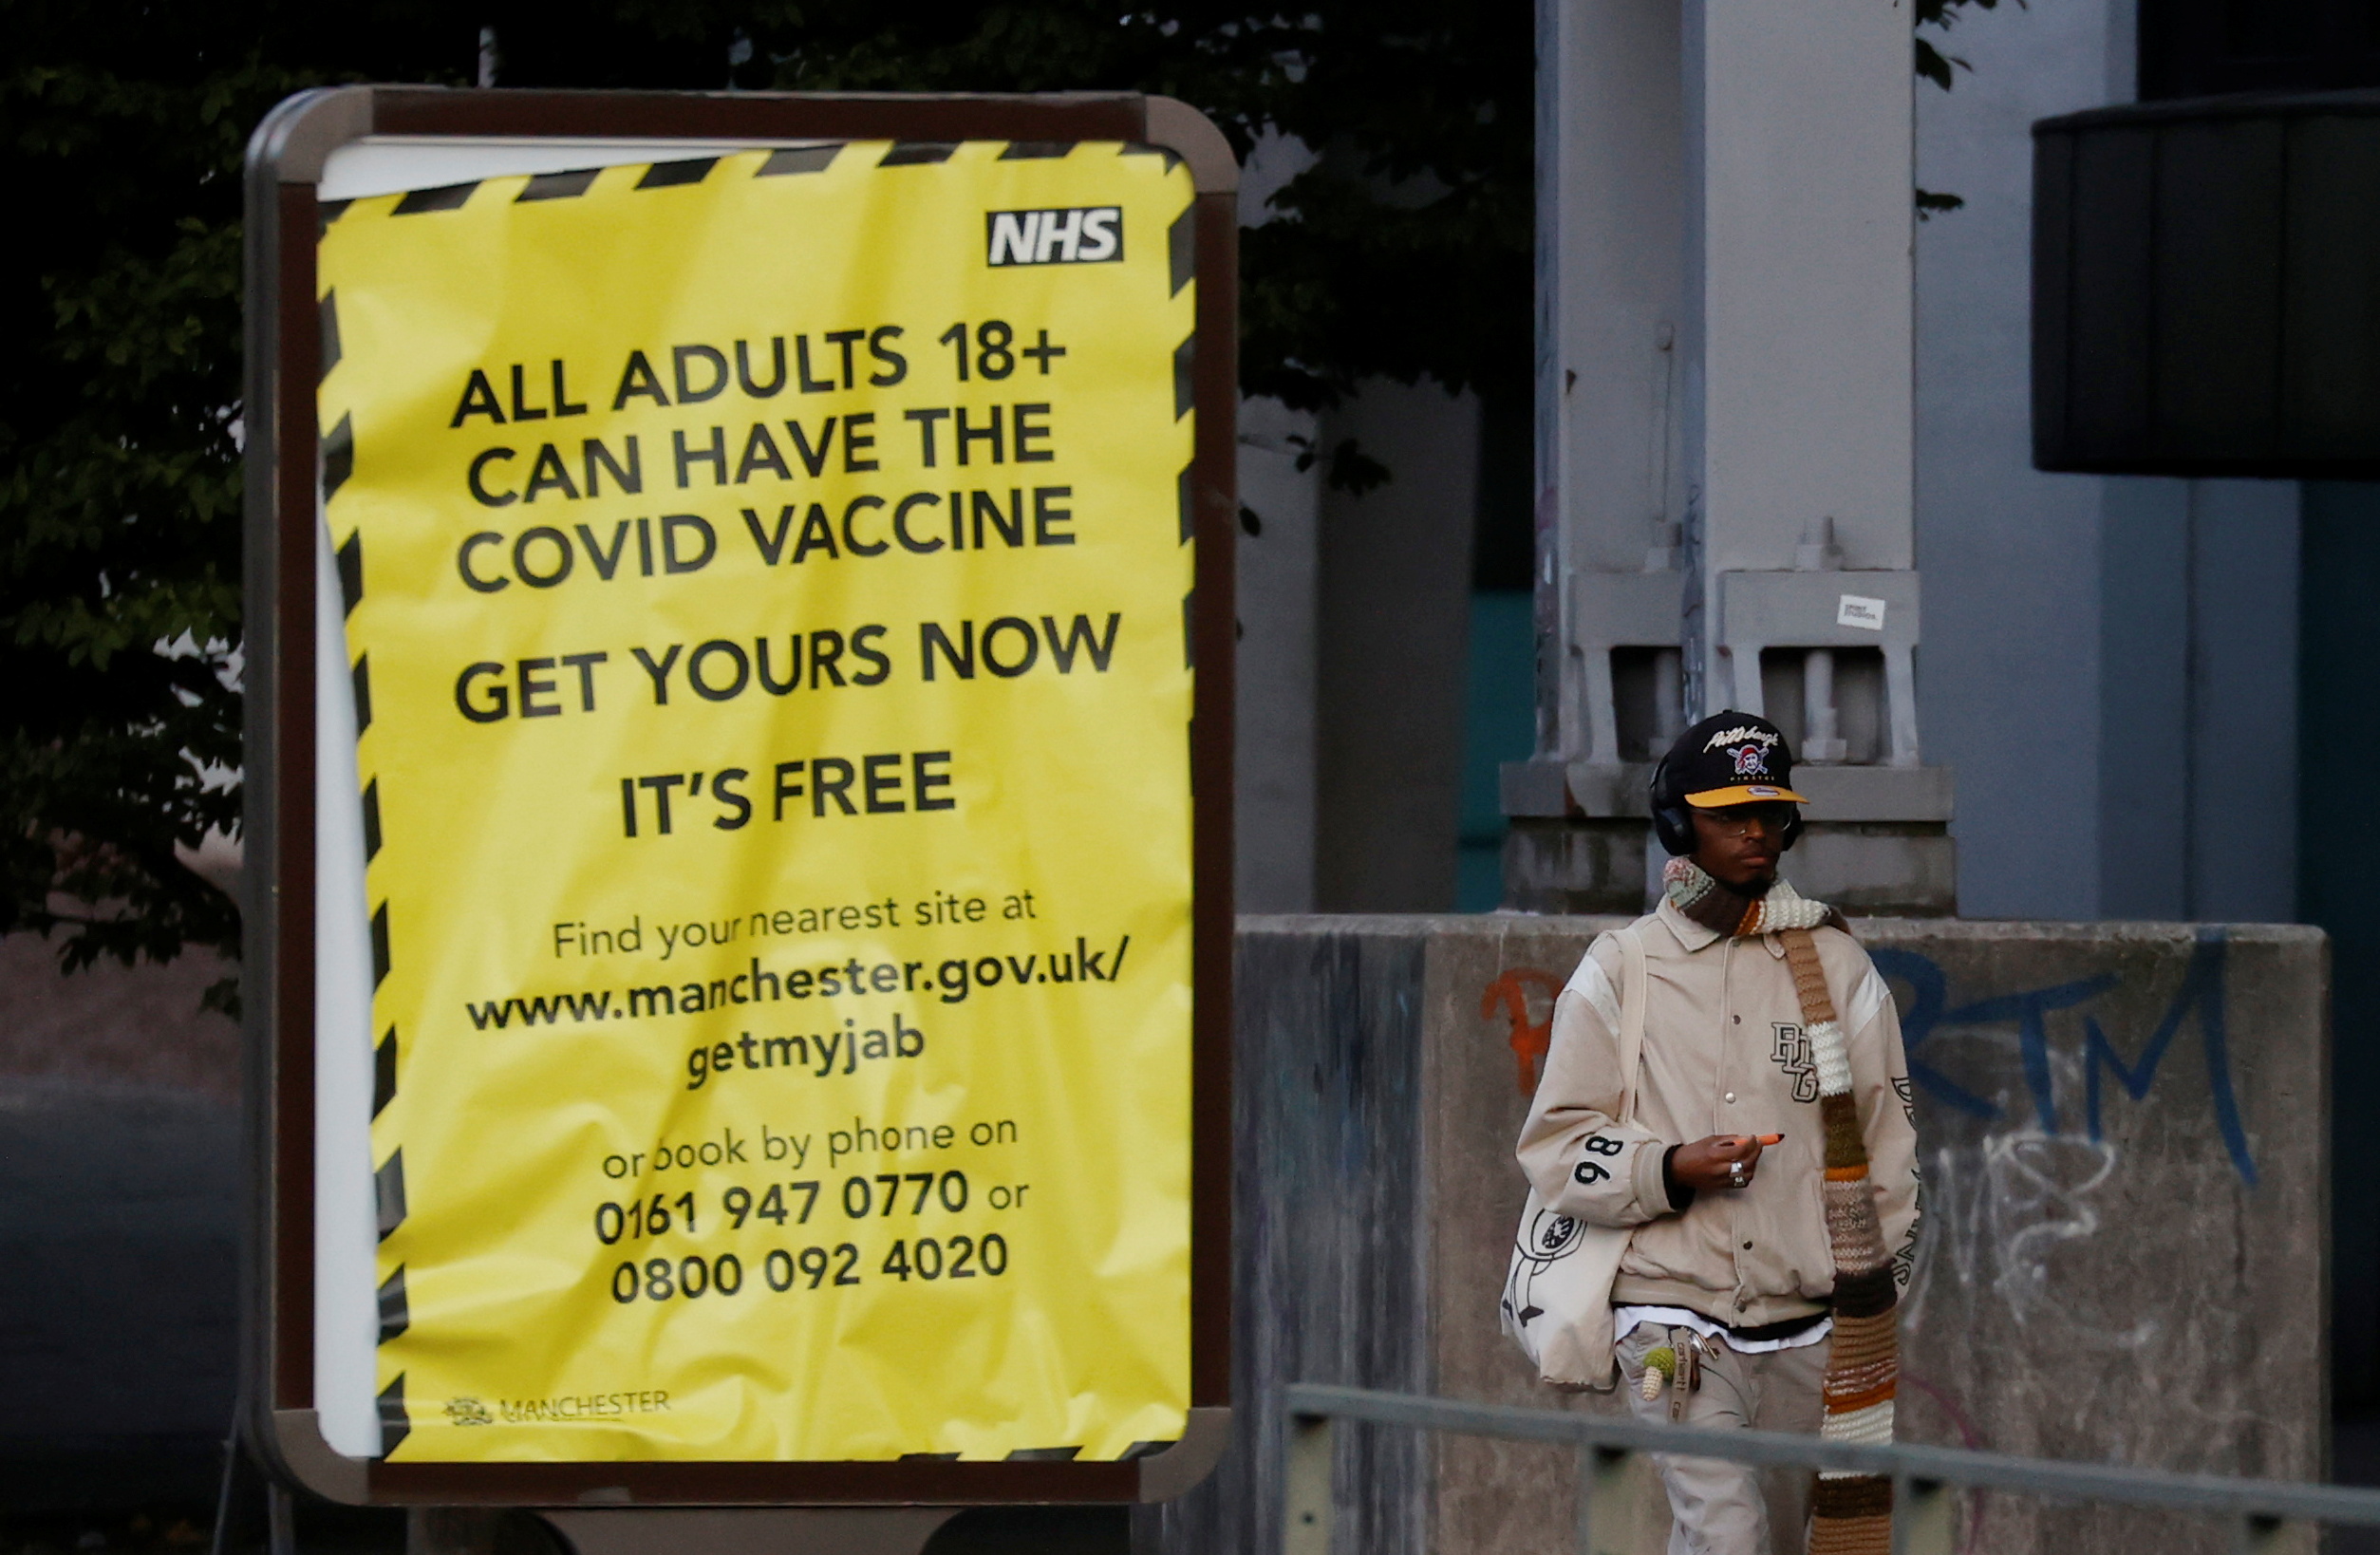 A man walks past a sign encouraging people to get their COVID-19 vaccine doses in Manchester